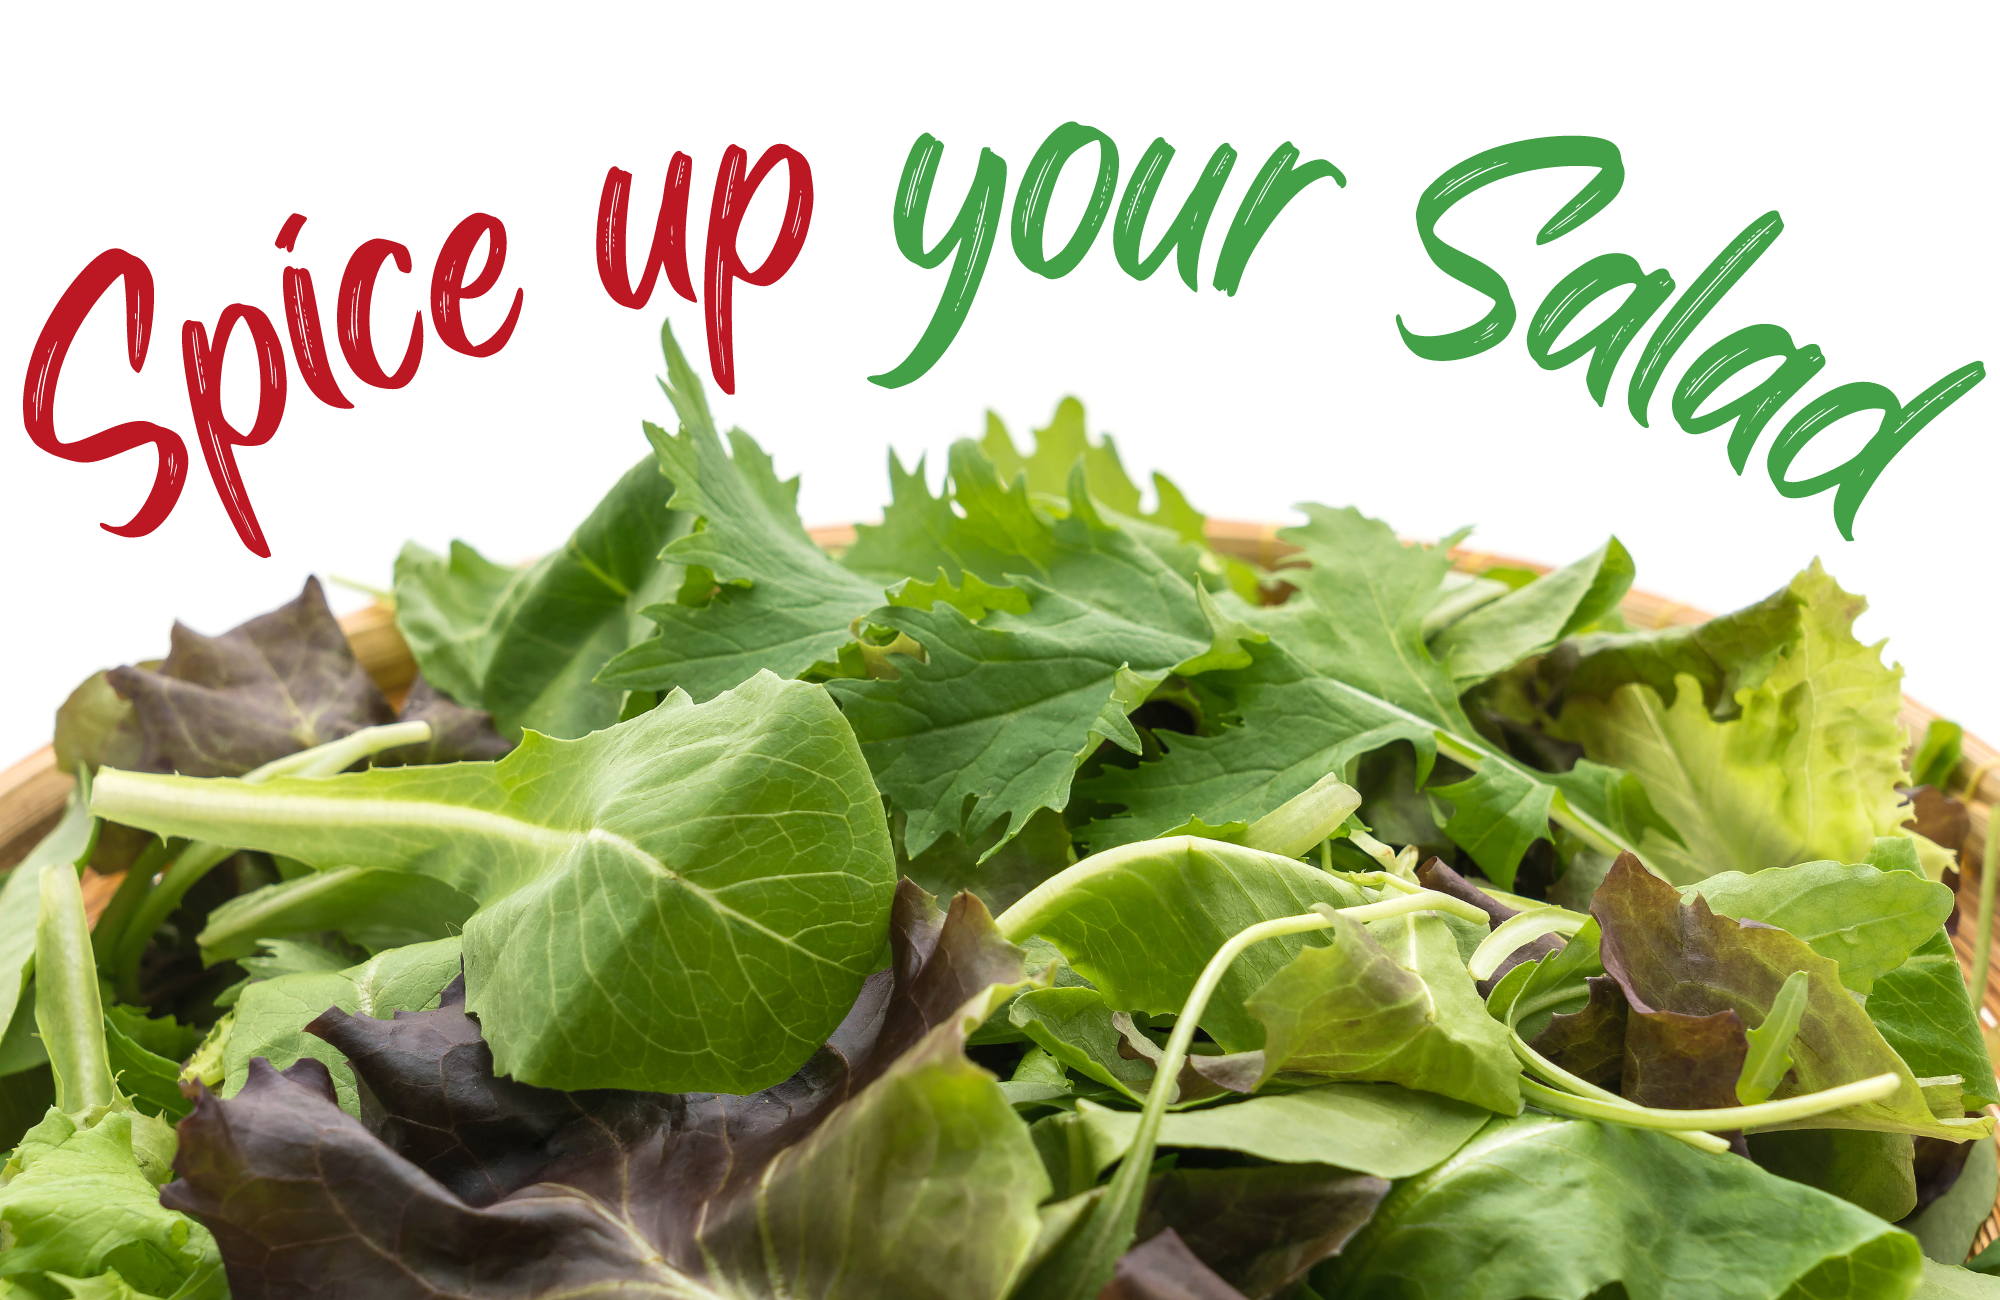 A bowl of mixed salad greens with the words "Spice up your Salad" over top